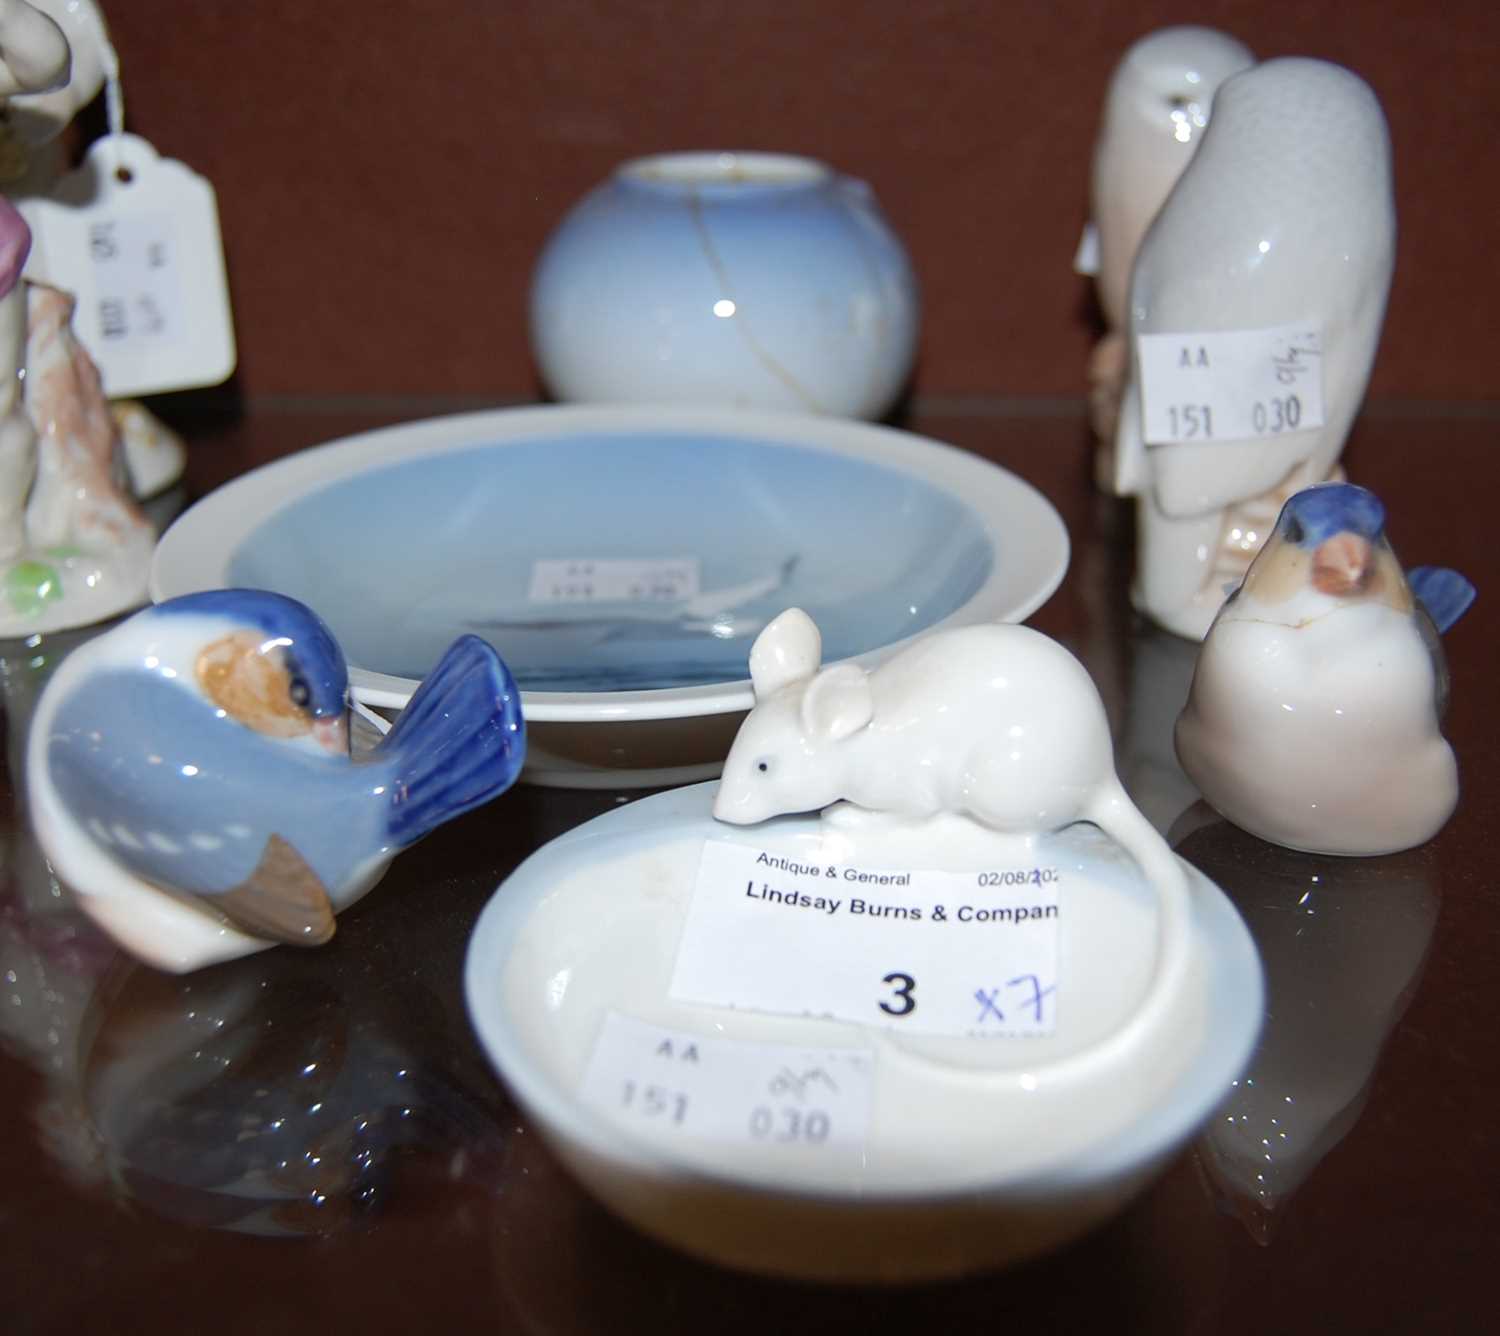 A collection of Royal Copenhagen porcelain to include a pair of owls, two small birds, a dish with